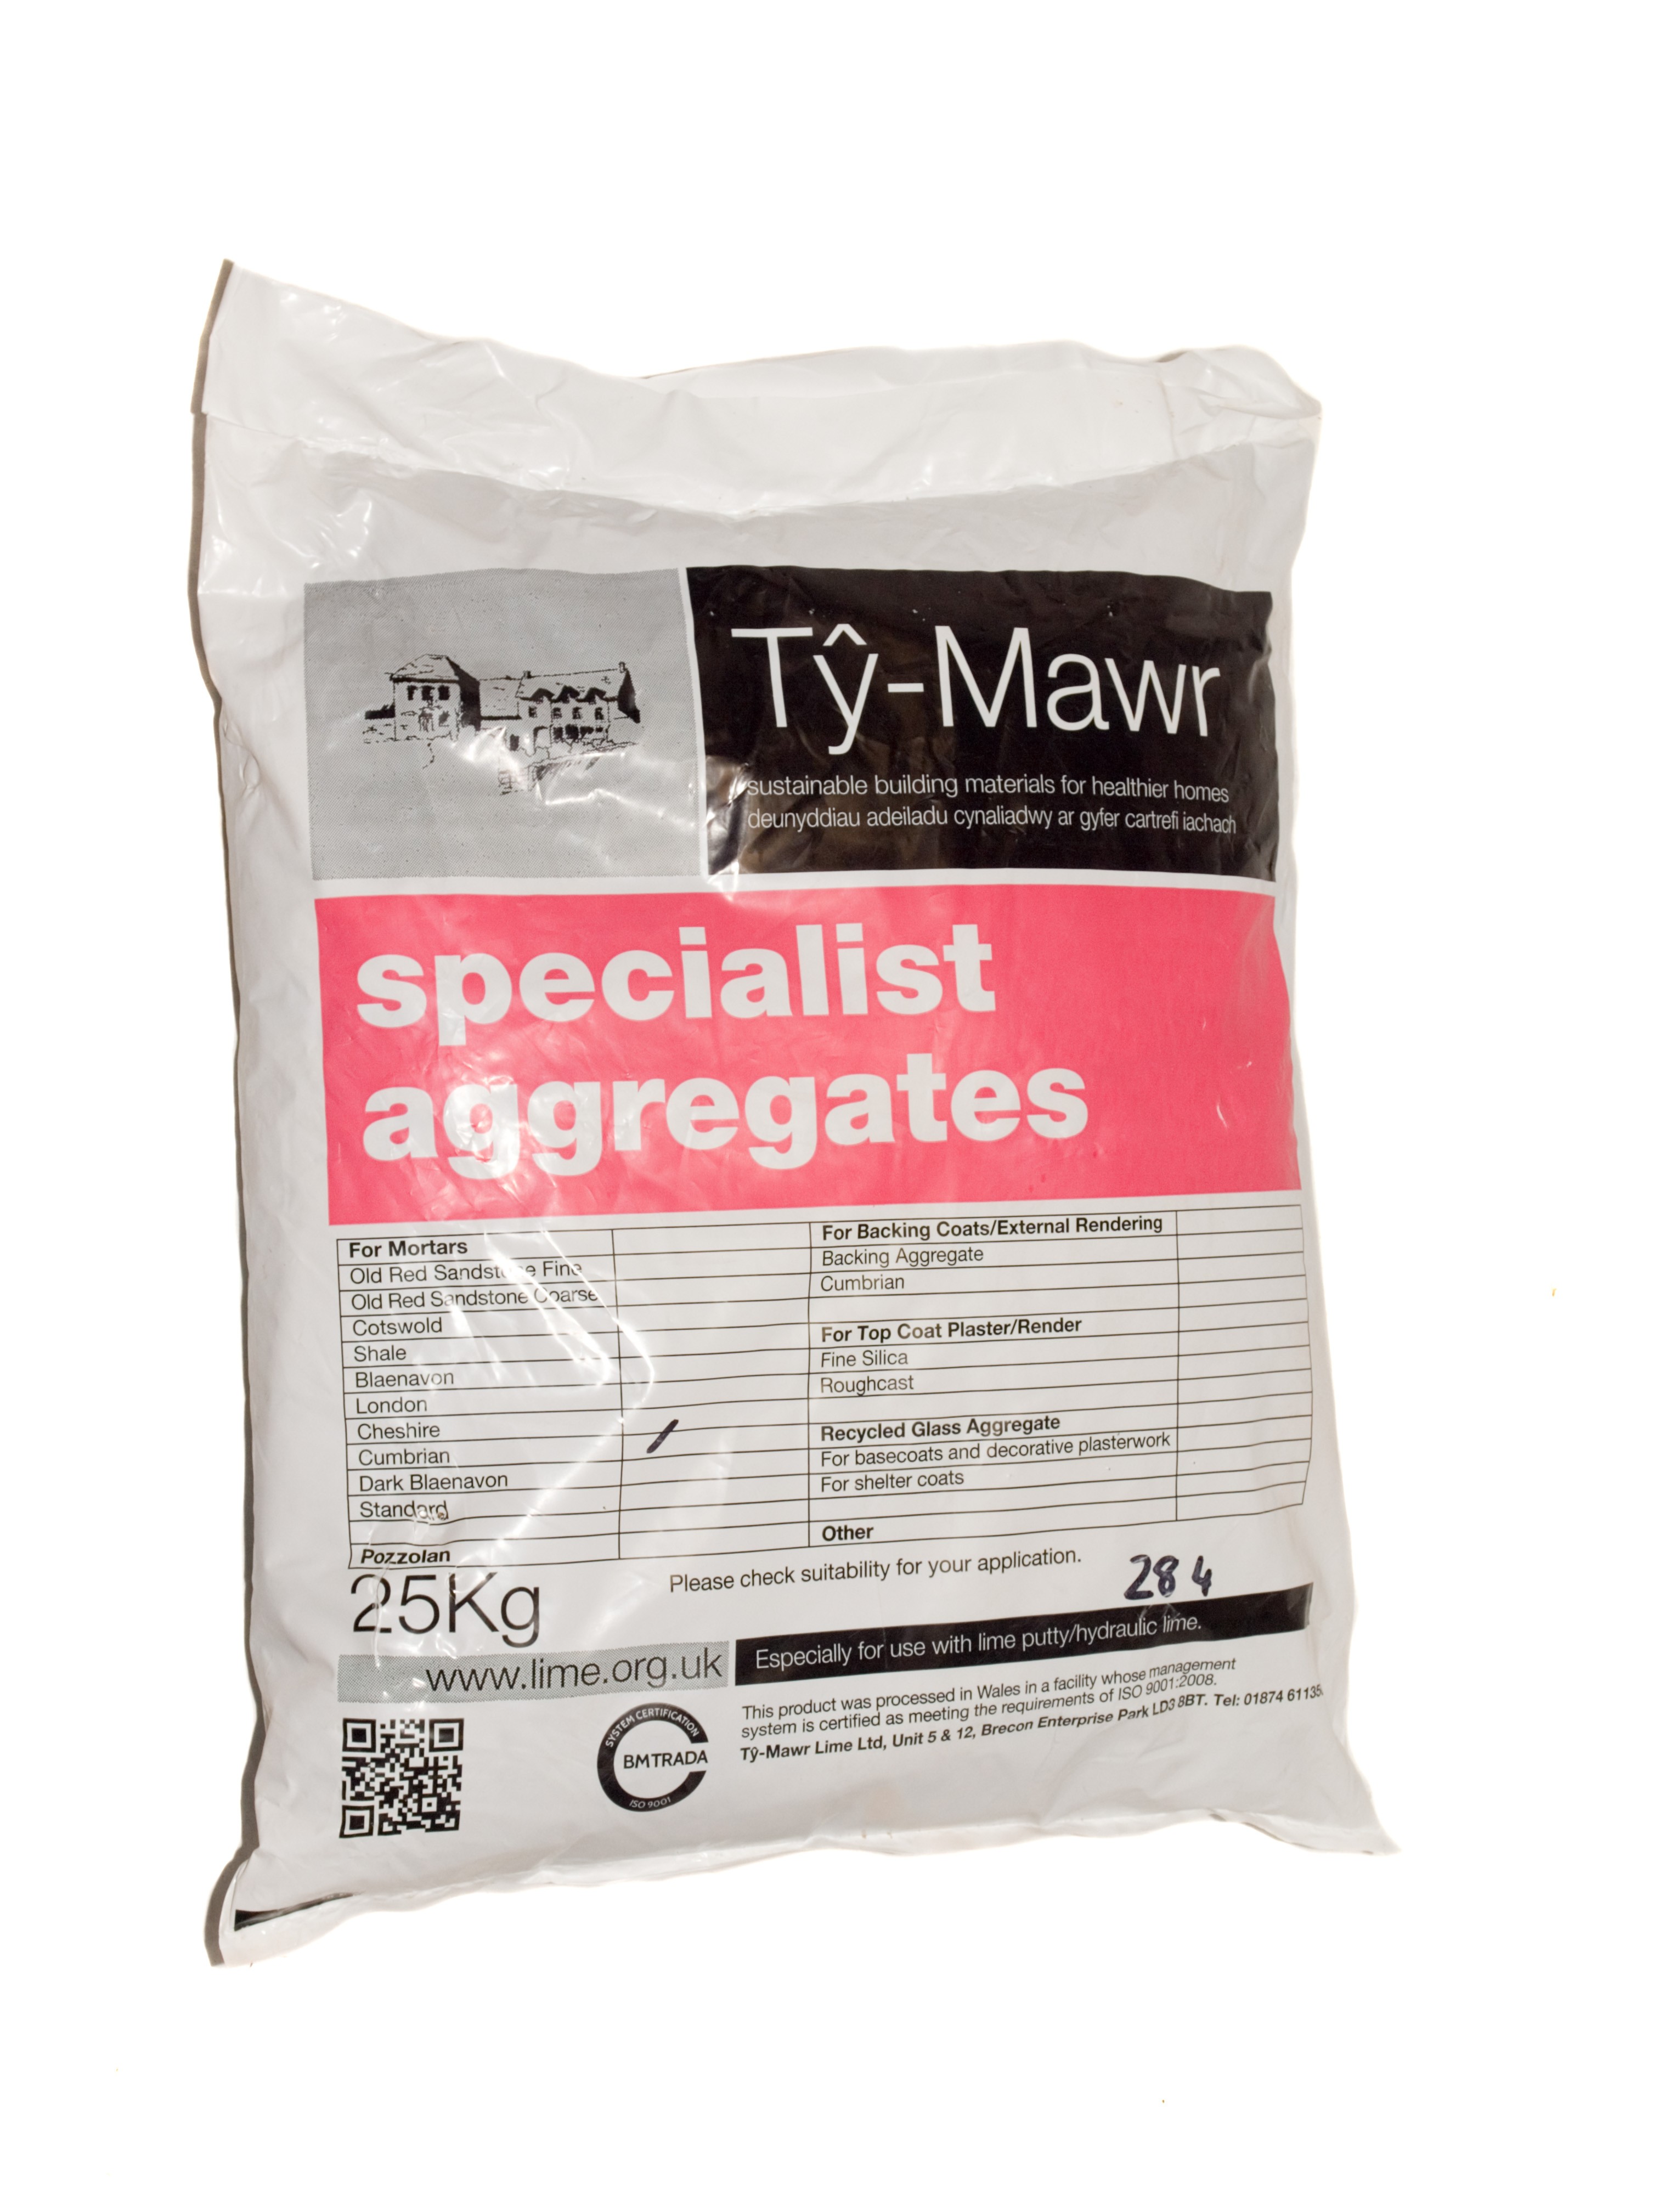 Aggregates for Backing Coat Plasters/Renders